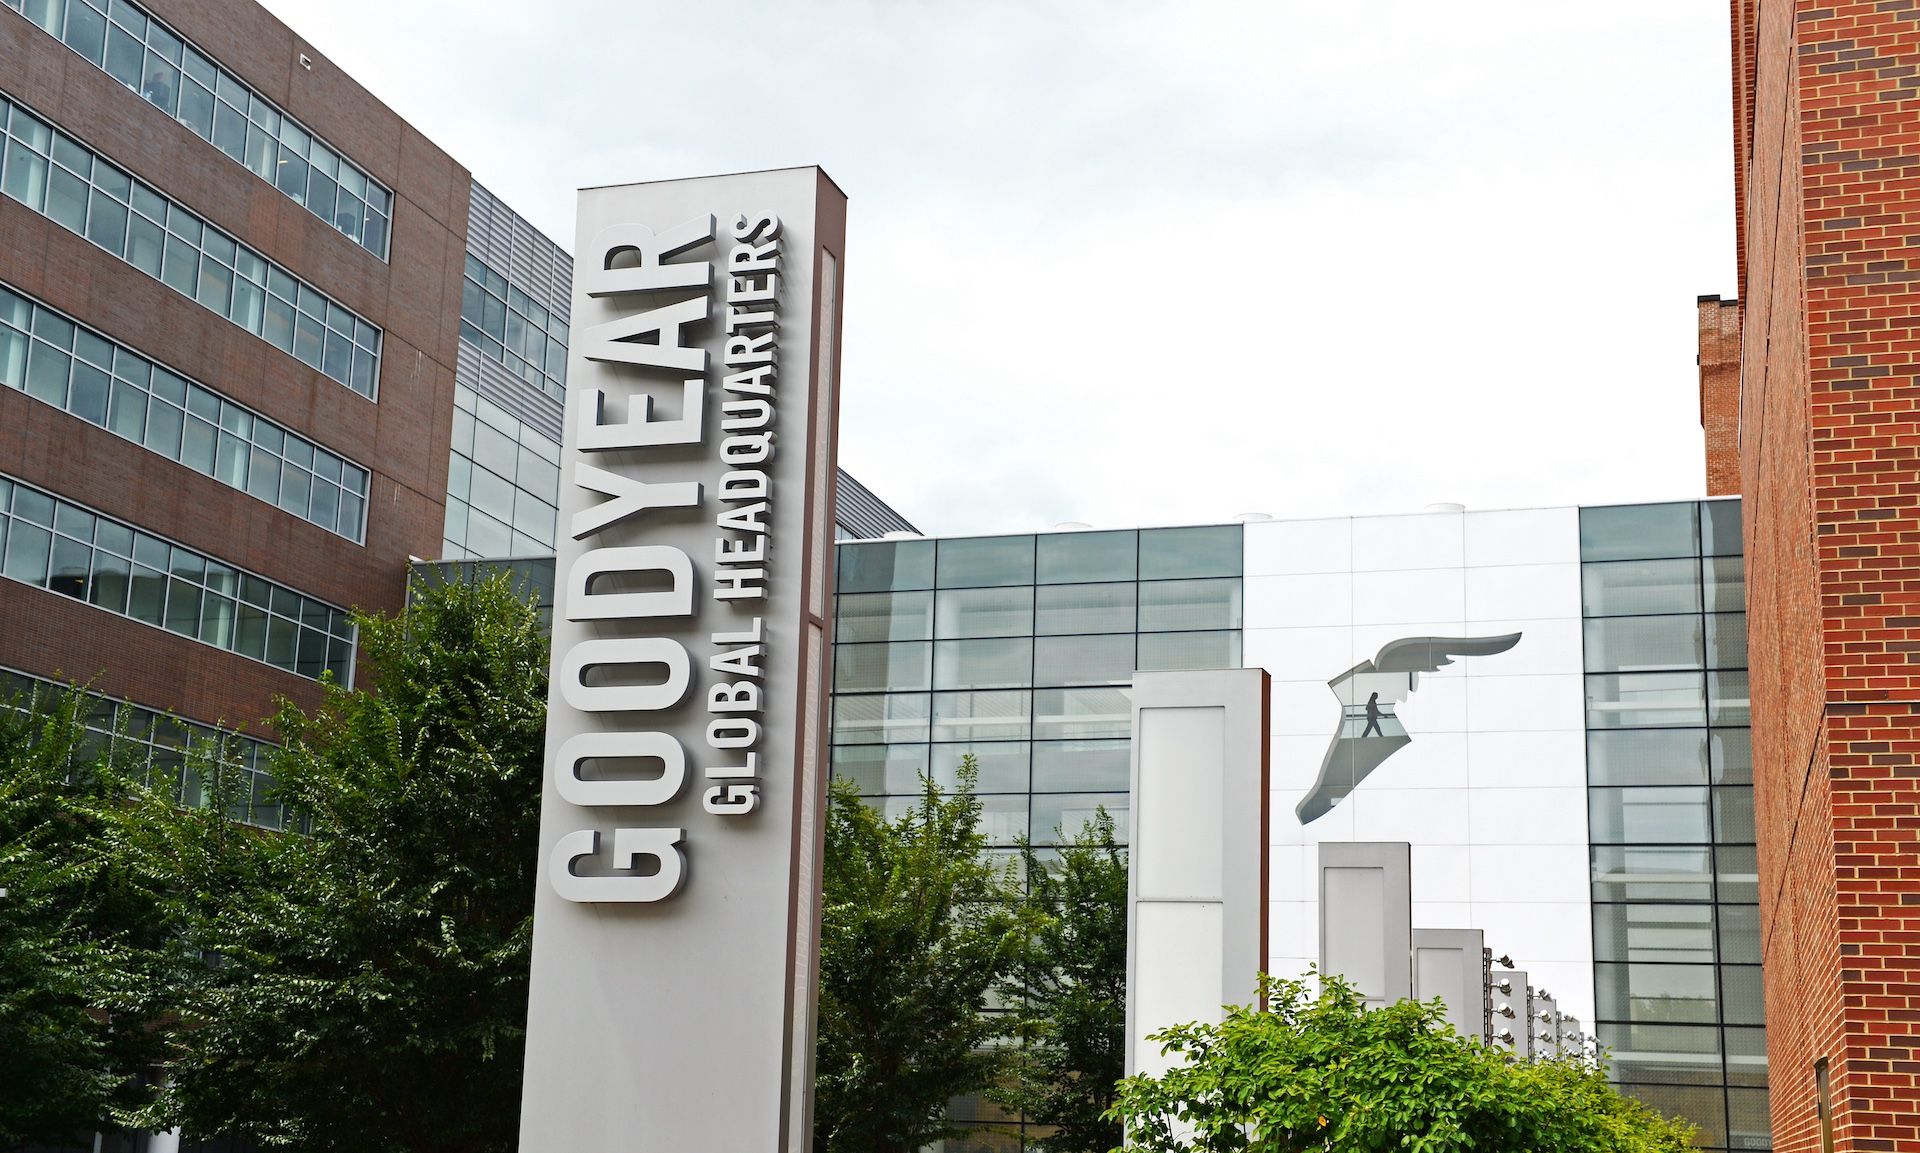 A photo of the facade of Goodyear's Global Headquarters in Akron, Ohio